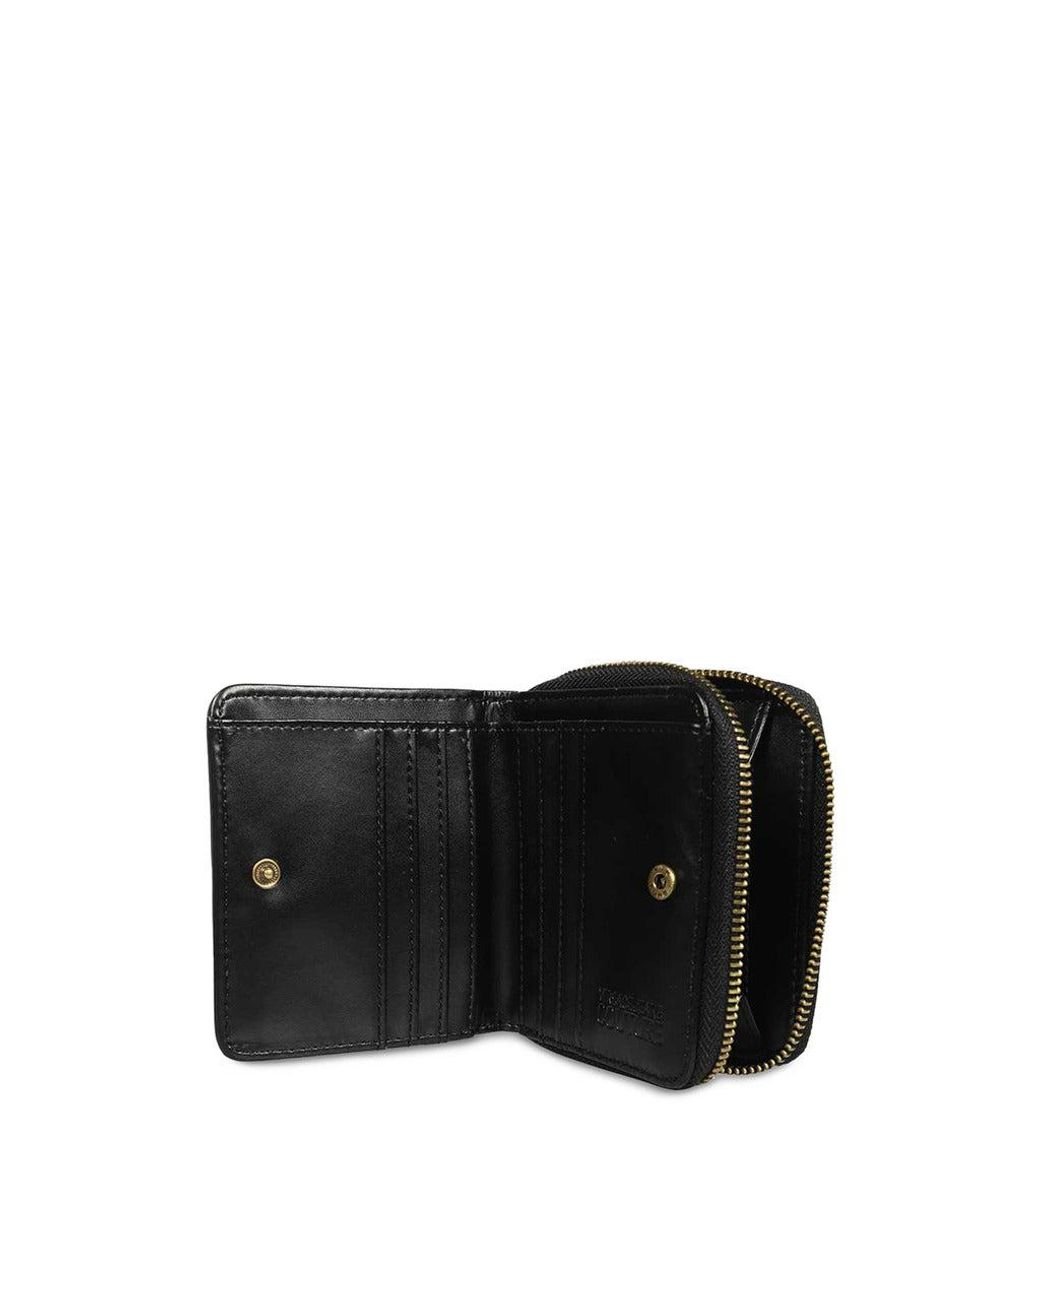 Versace Jeans Couture Jeans Wallet in Black | Lyst